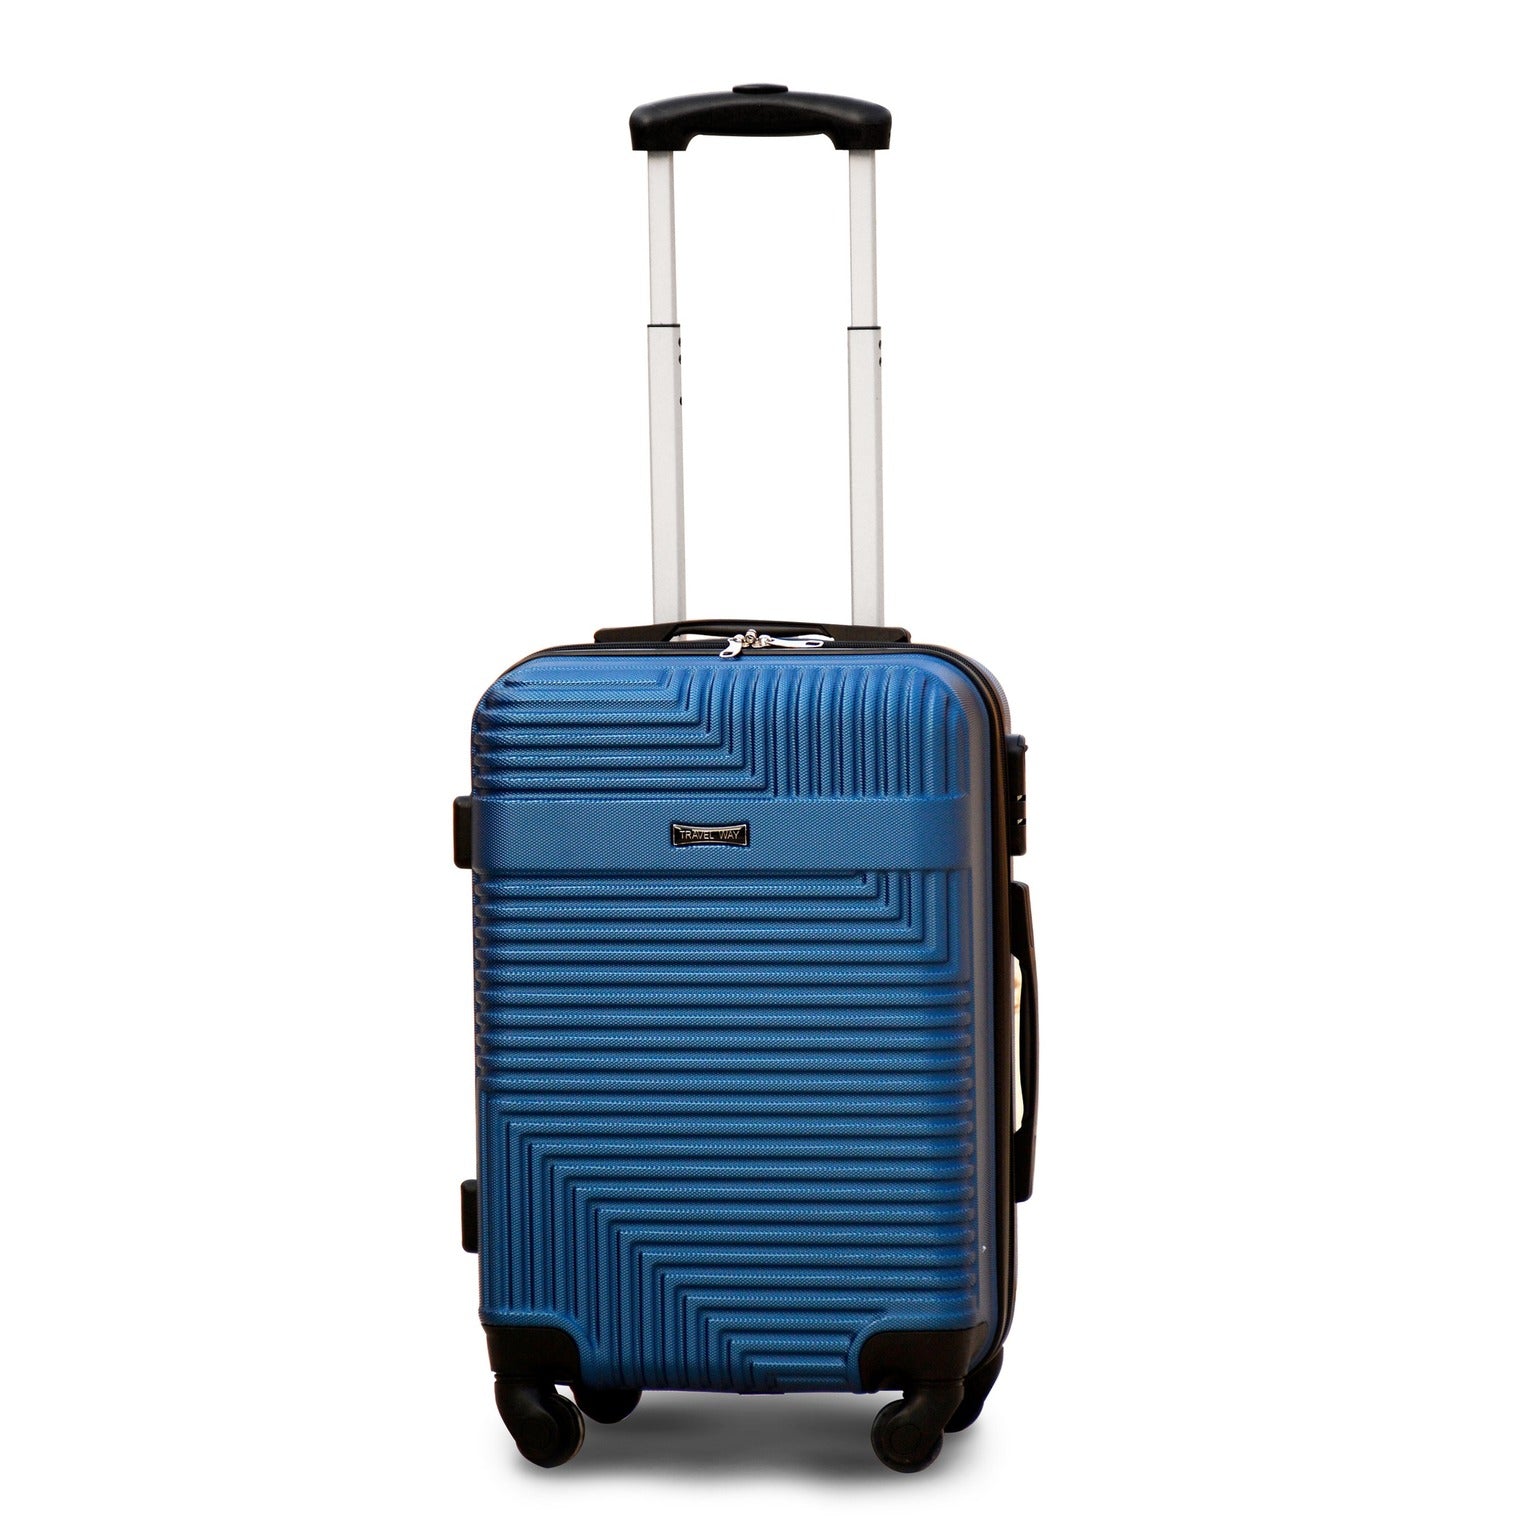 20" Blue Colour Travel Way ABS Luggage Lightweight Hard Case Trolley Bag Zaappy.com